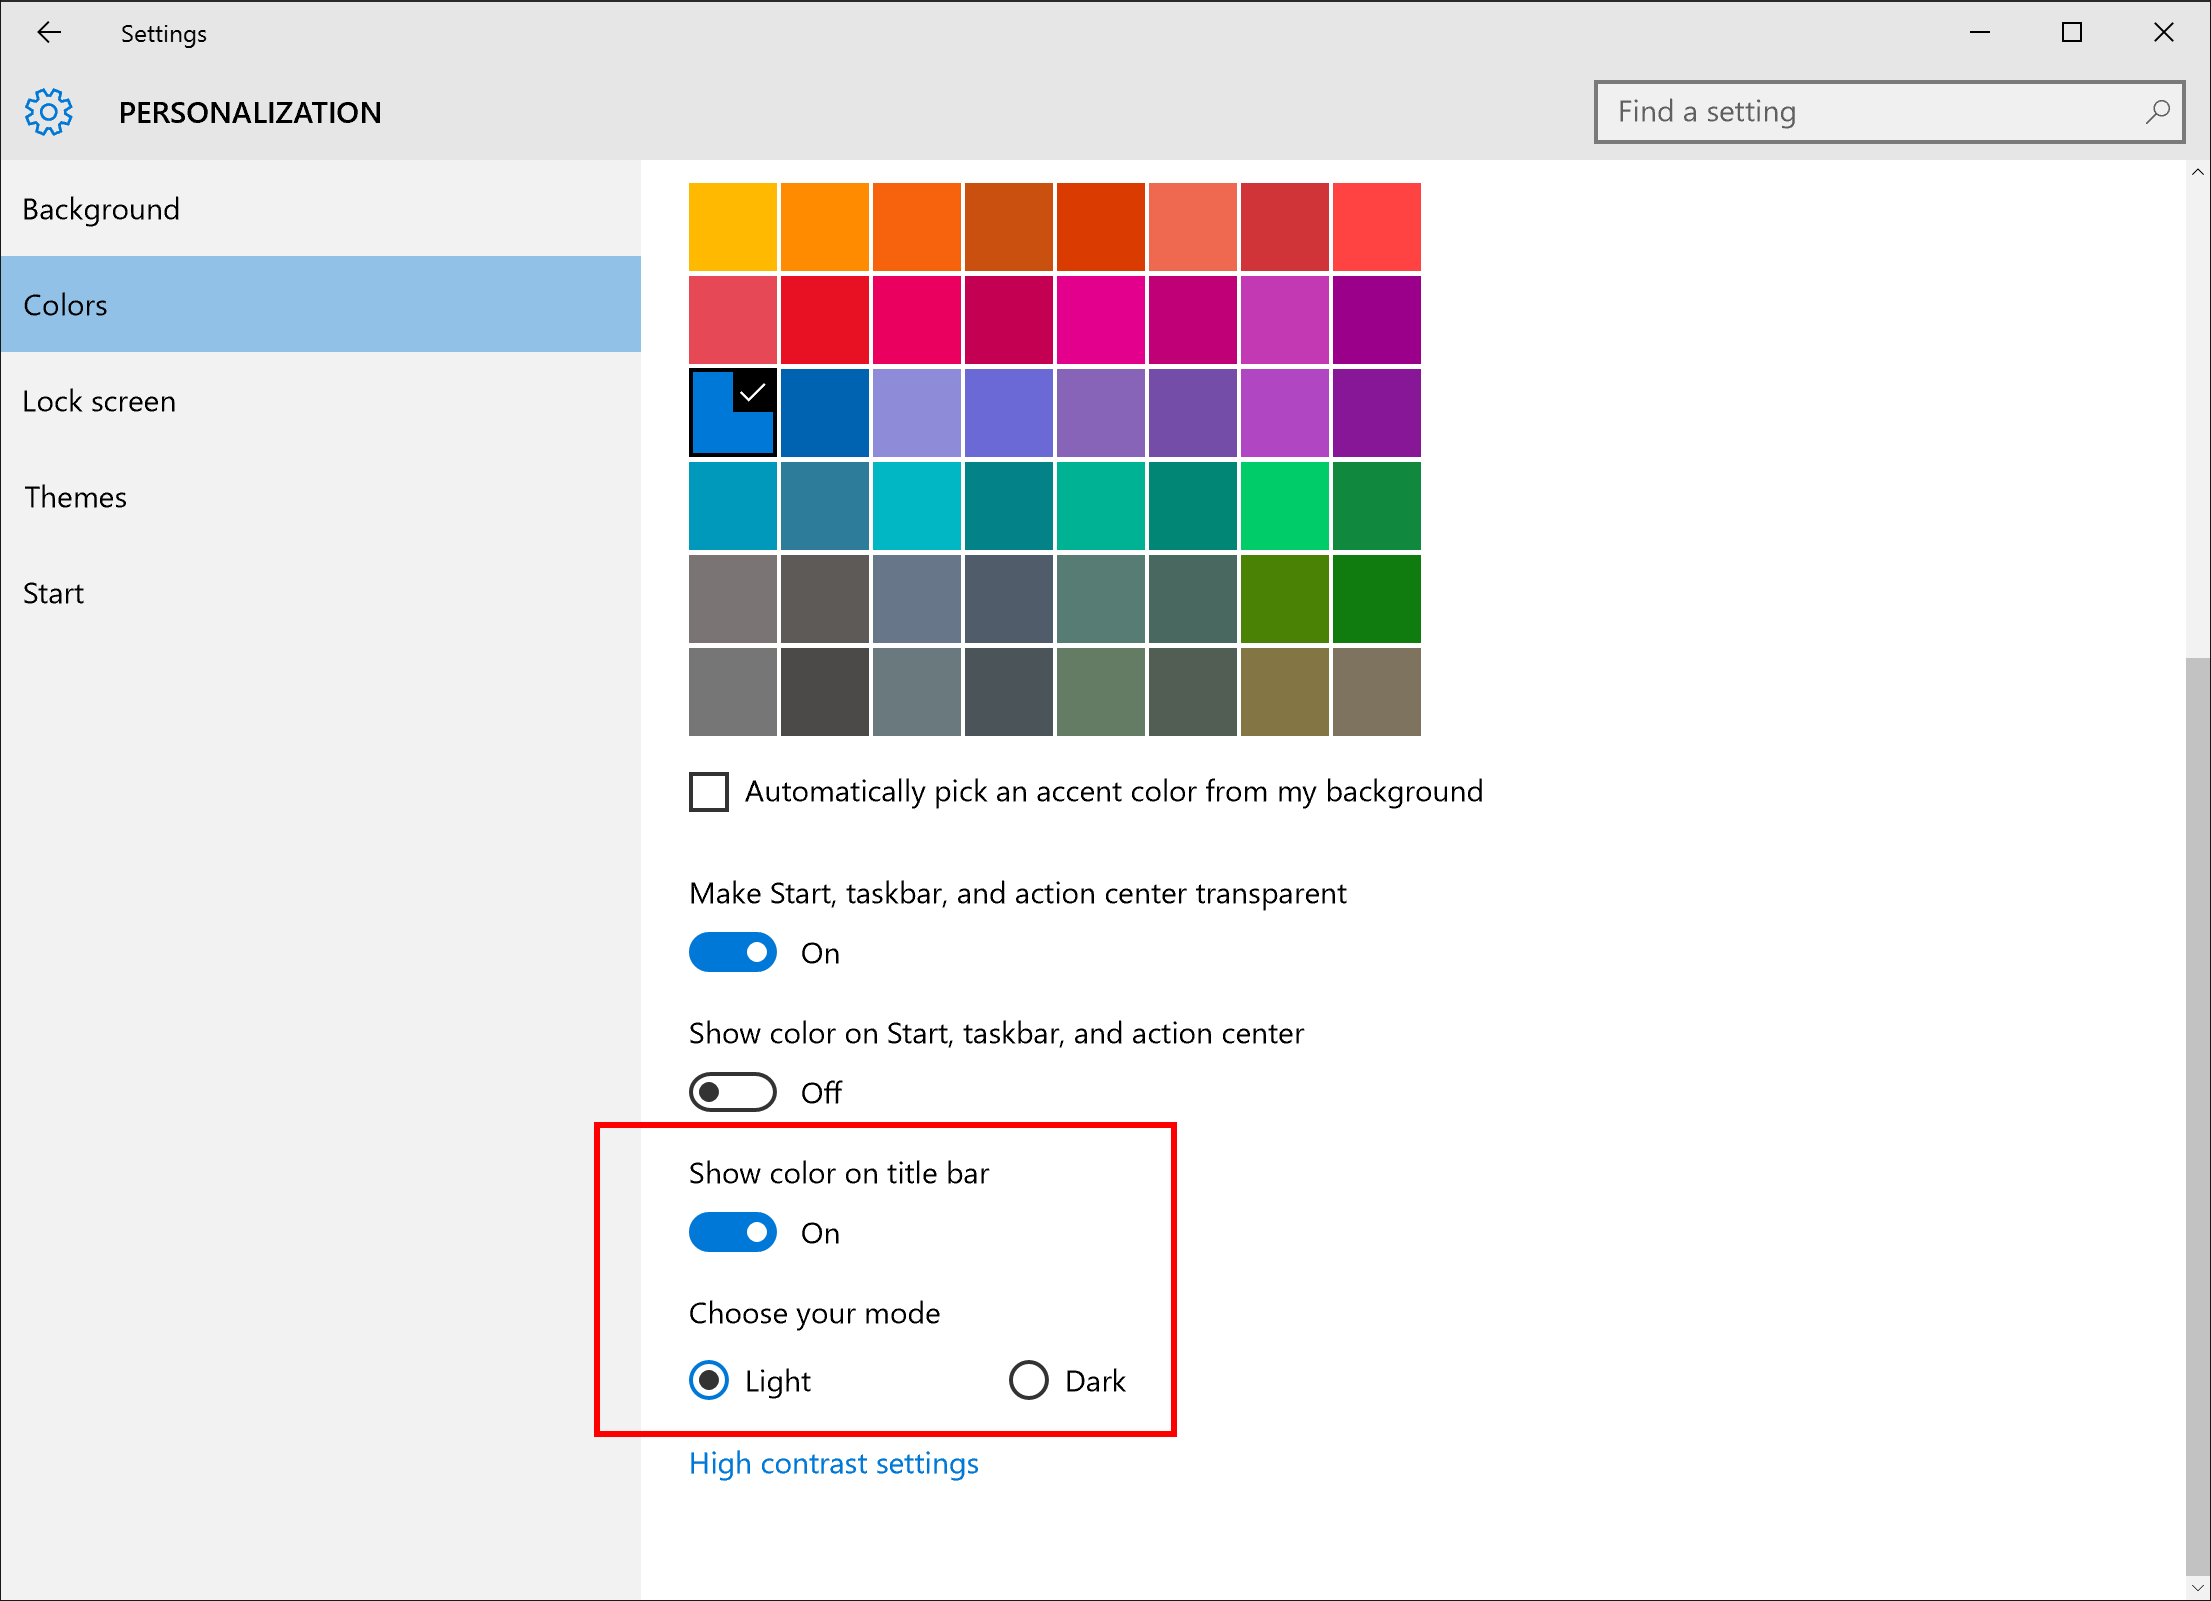 Windows 10 Insider Preview Build 14316 - personalization-updates-colors